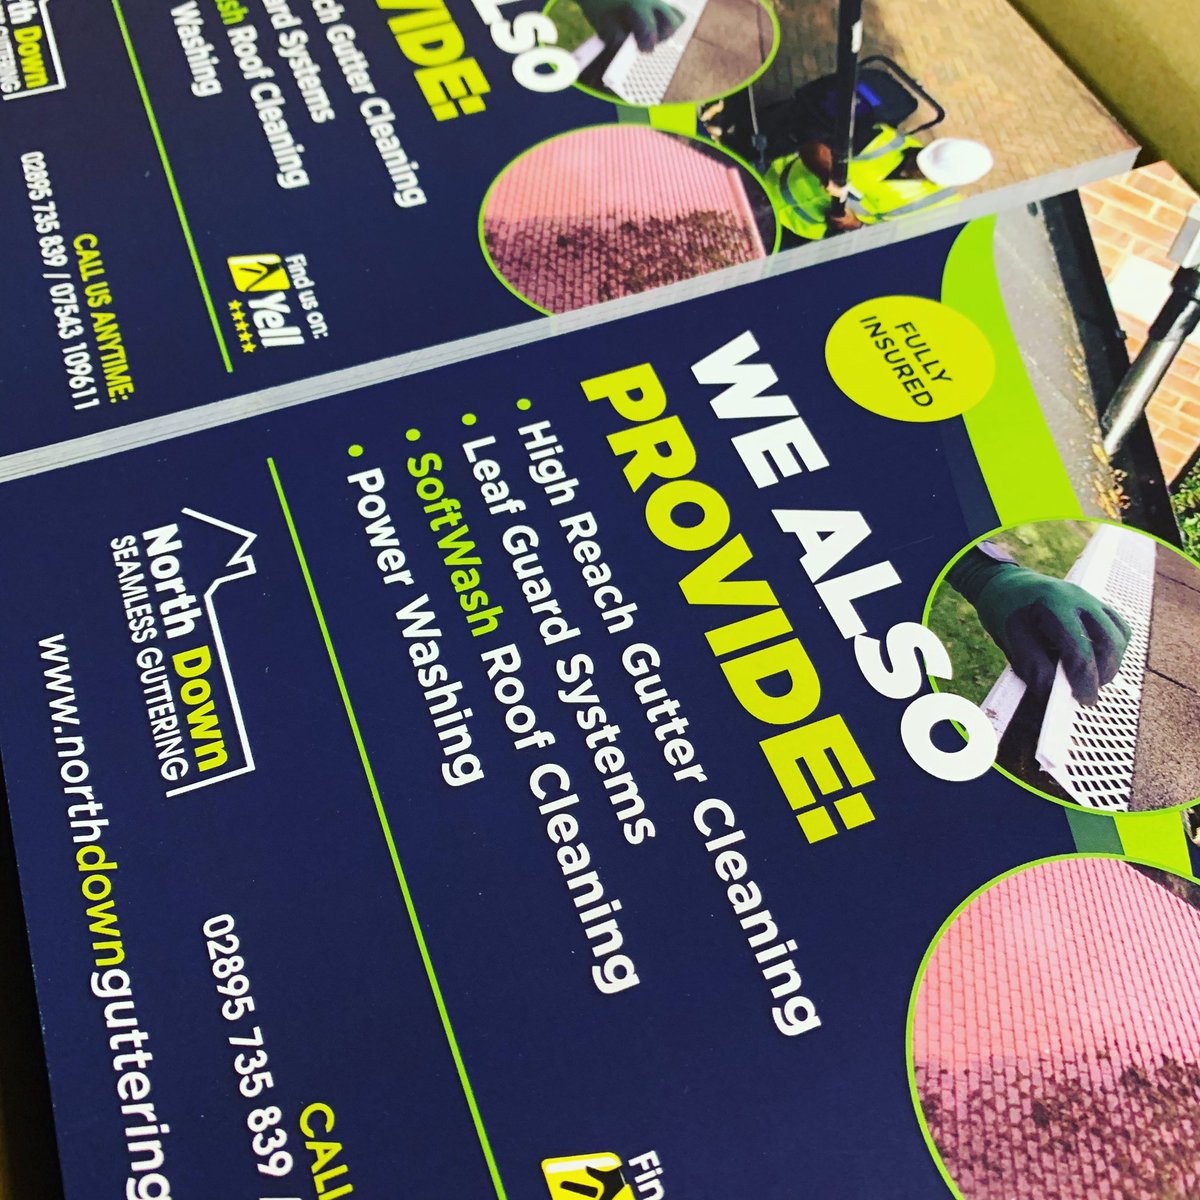 Flyers are a great way to advertise your business on a budget... Order online today and save 20% using code GIVEME20...

Contact our team today...

#digitalprinting #printingbelfast #belfastprinter #flyers #leaflets #marketing #offers #printmarketing #ukprint #printireland